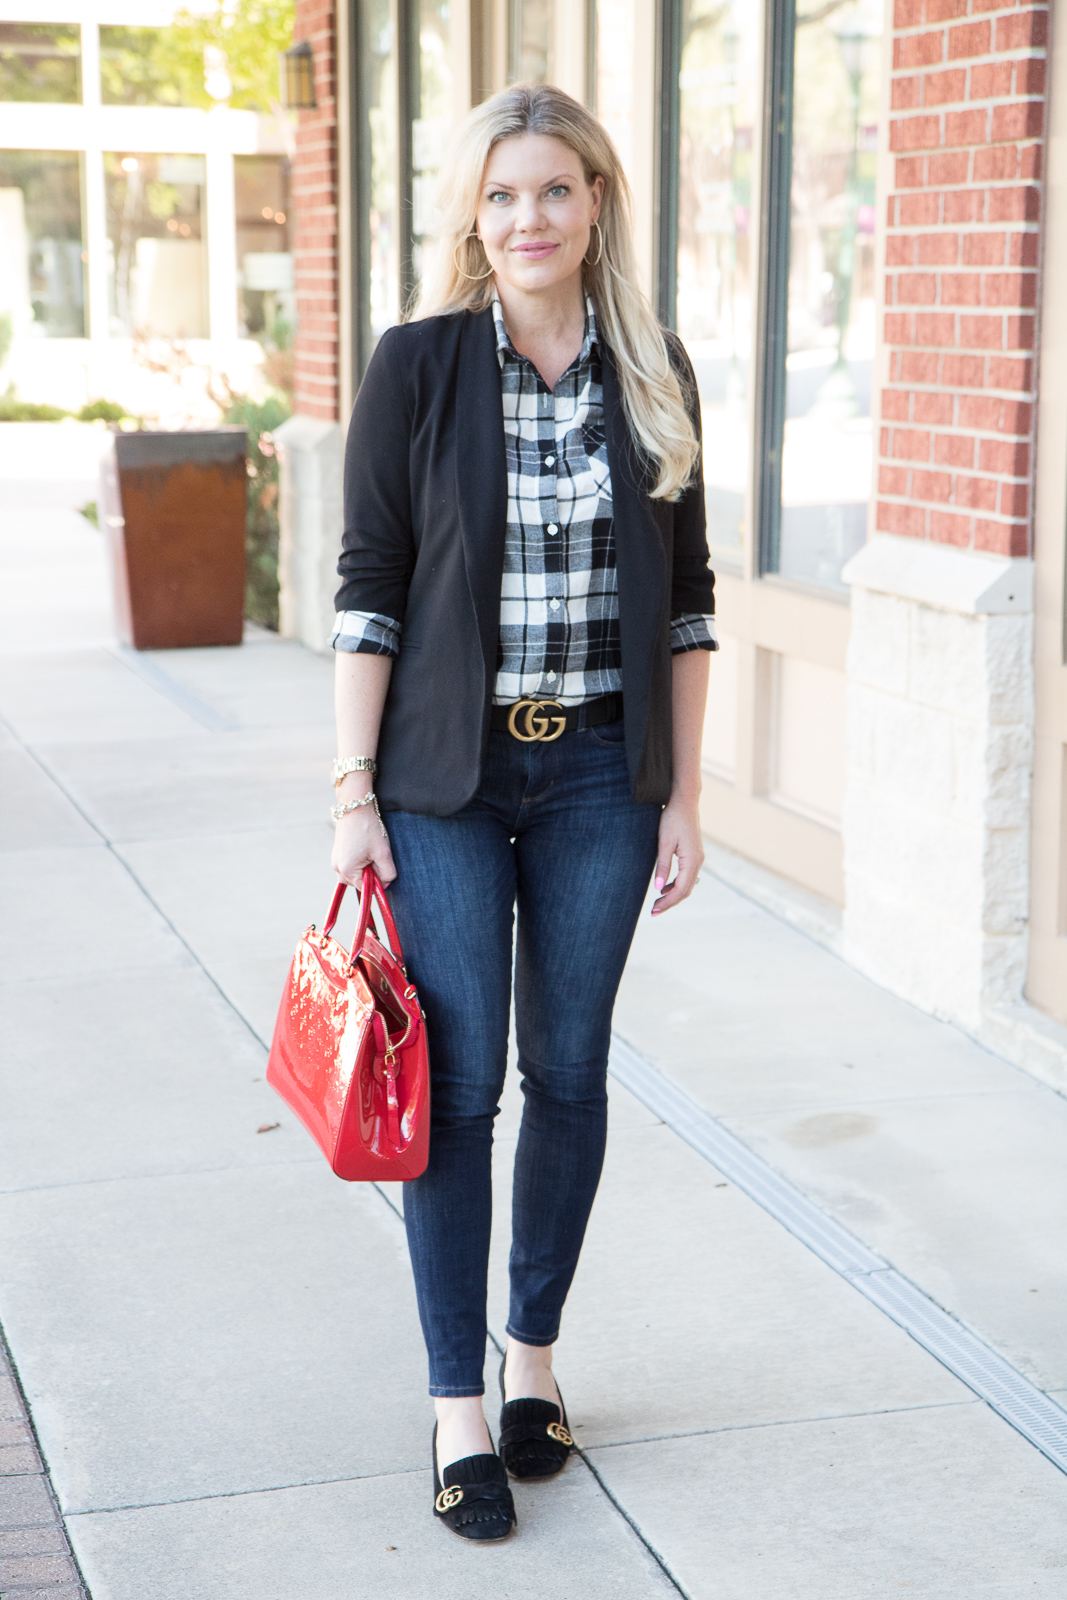 Love this style shirt with jeans, and of course love Louis Vuitton Bag!